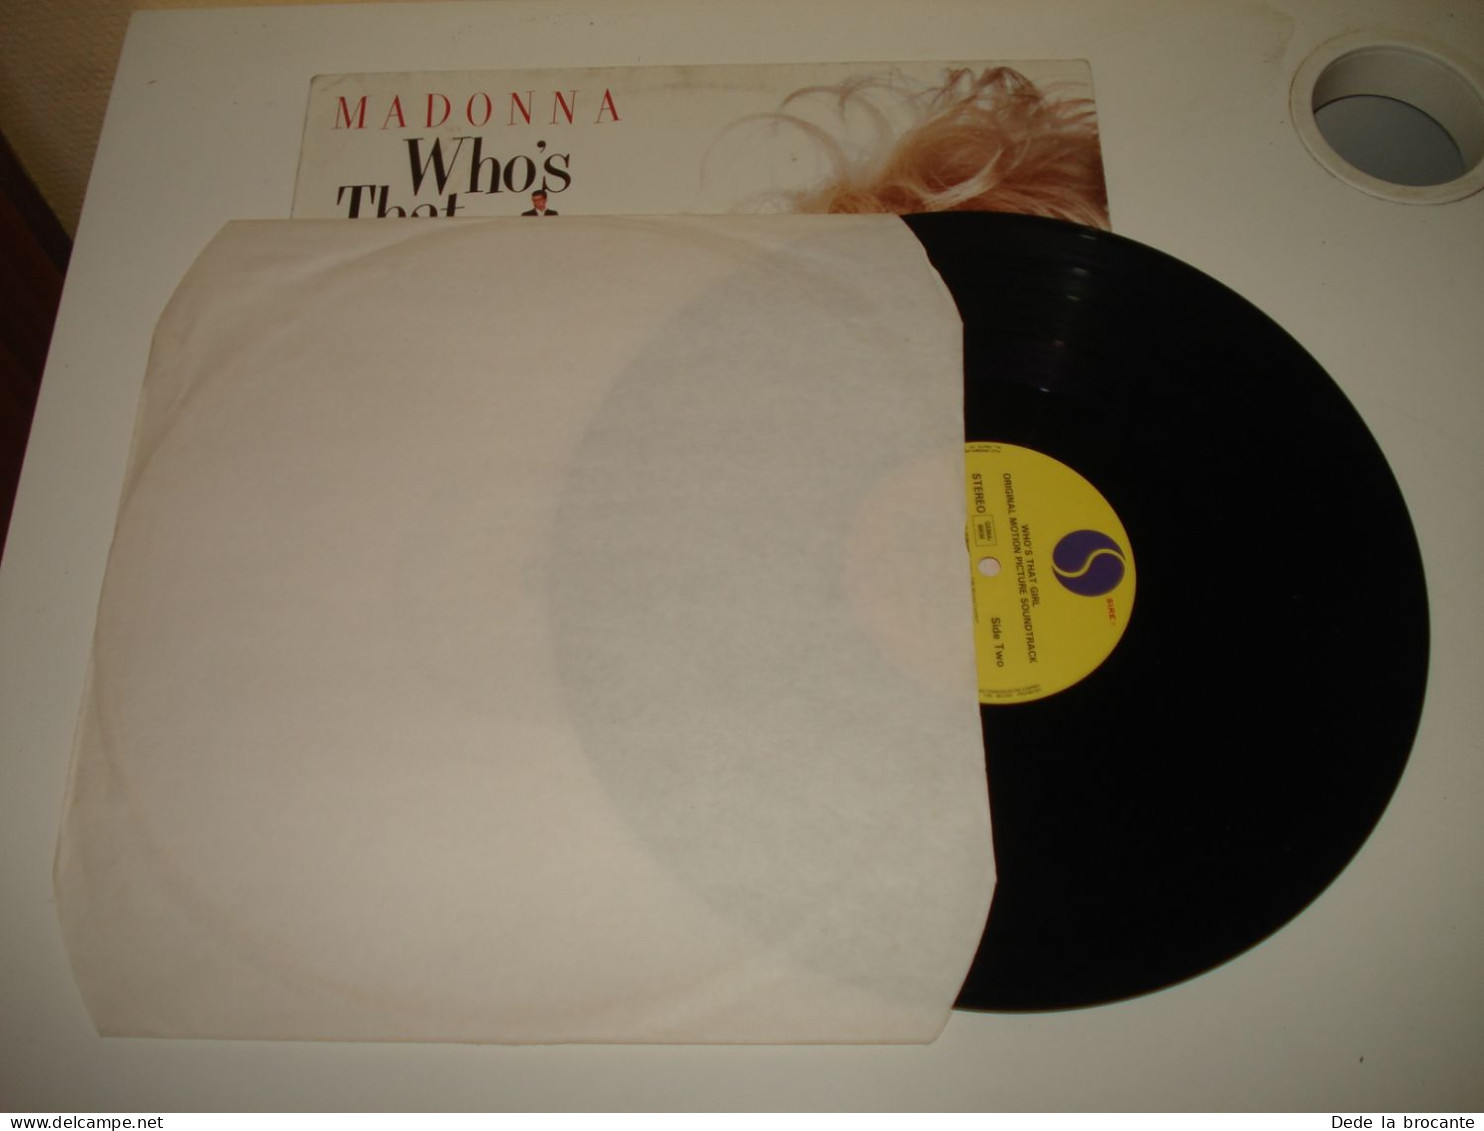 B12 / Madonna – Who's That Girl -Soundtrack - Sire – 925 611 1 - Ger 1987  EX/EX - Soundtracks, Film Music